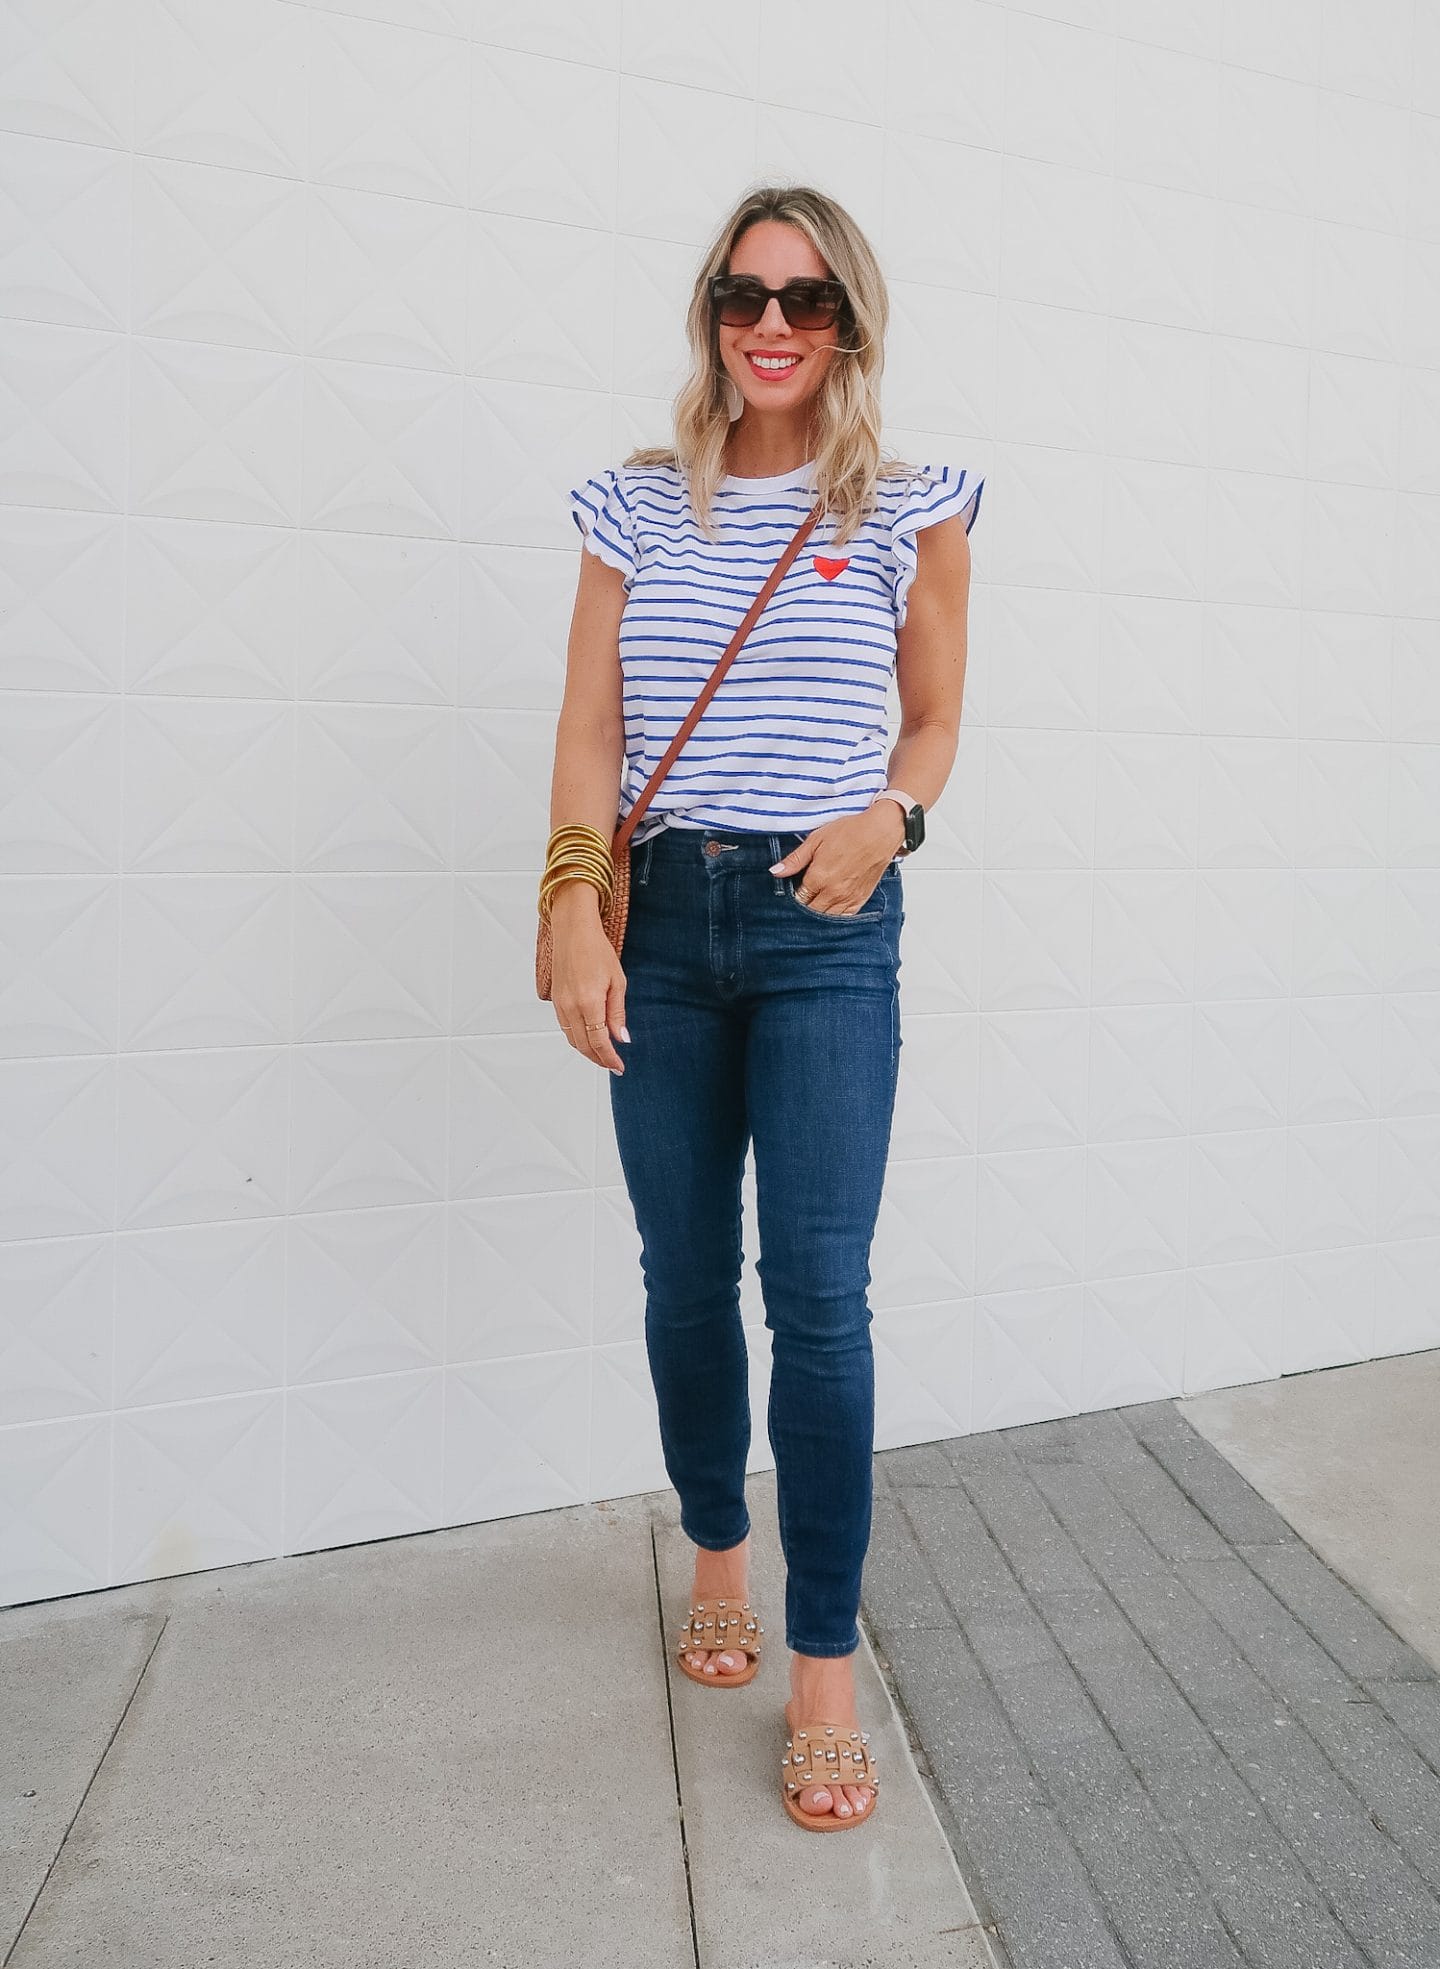 Outfits Lately, Striped Heart Top, Jeans, Sandals, Crossbody 